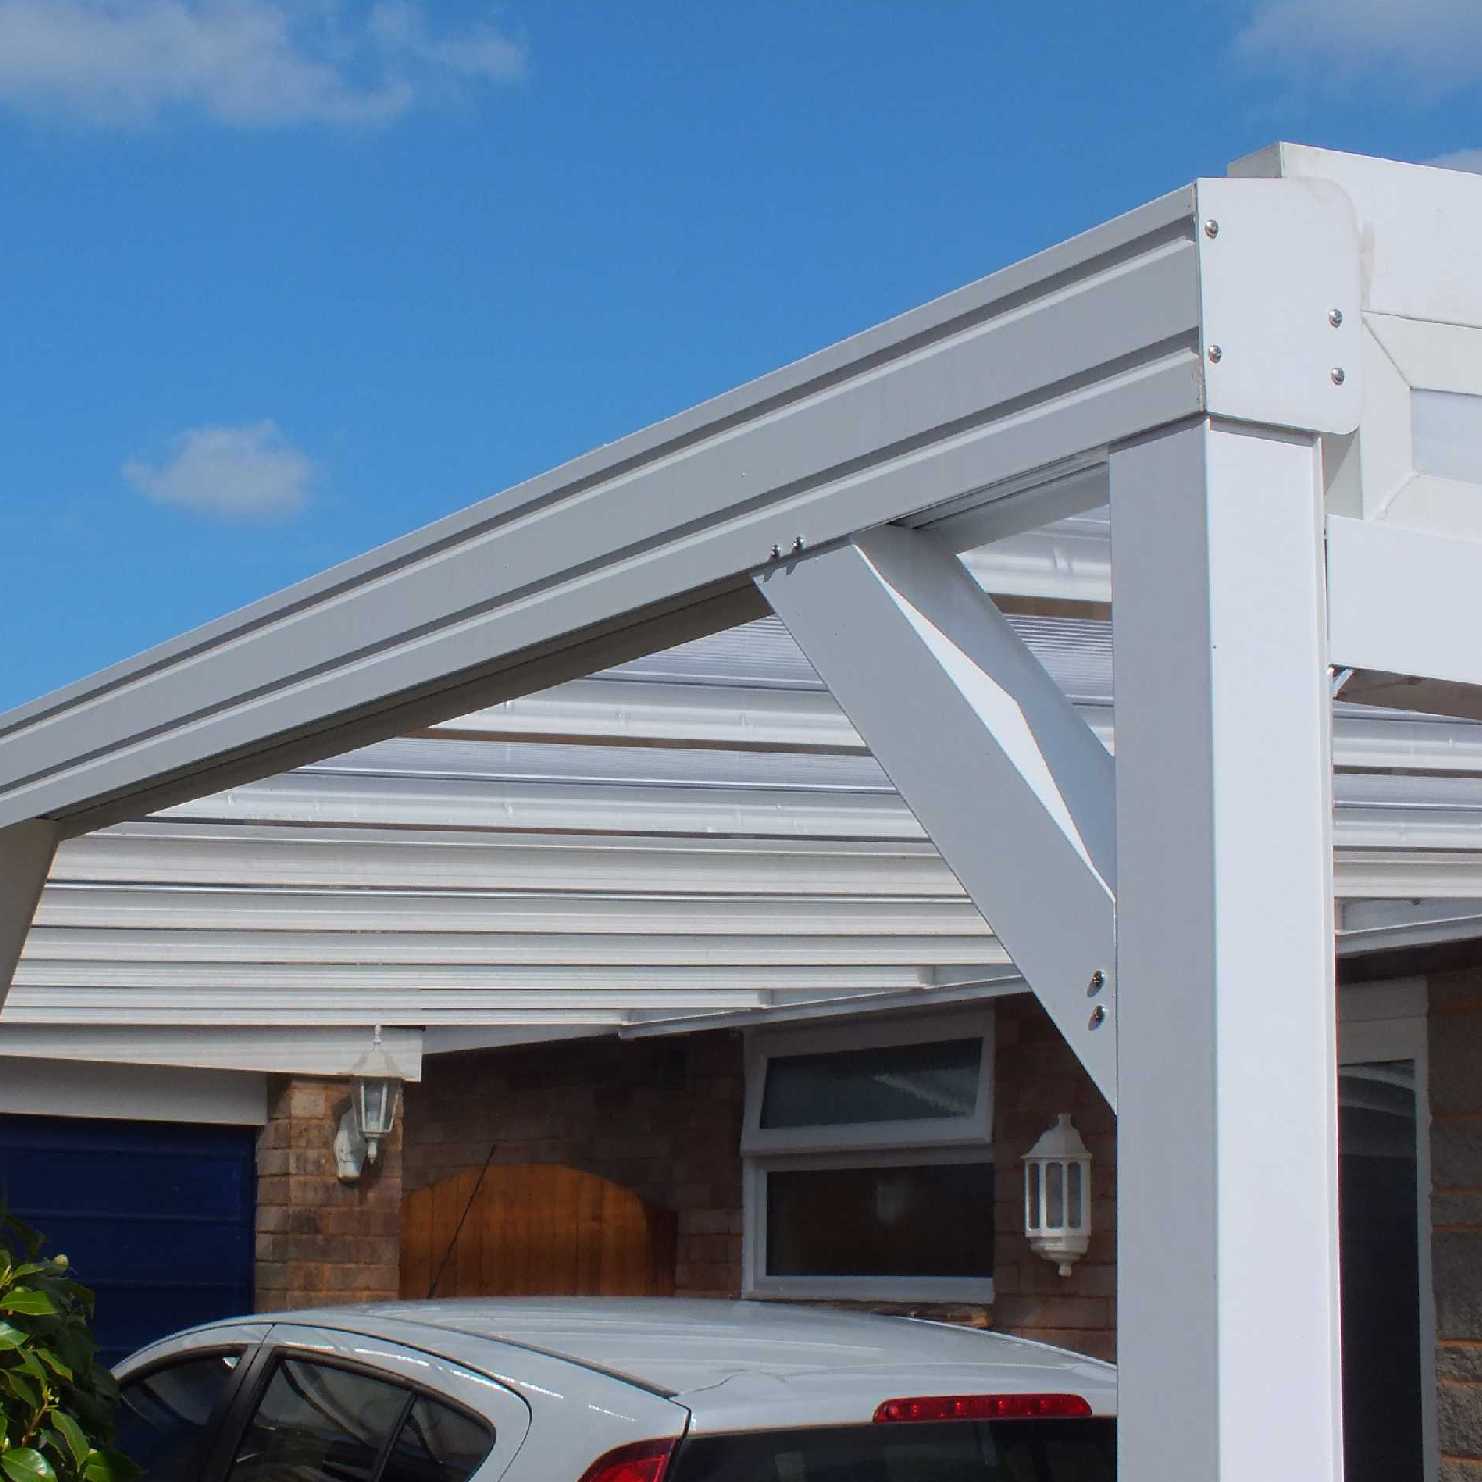 Buy Omega Smart Lean-To Canopy, White with 16mm Polycarbonate Glazing - 7.0m (W) x 3.5m (P), (4) Supporting Posts online today